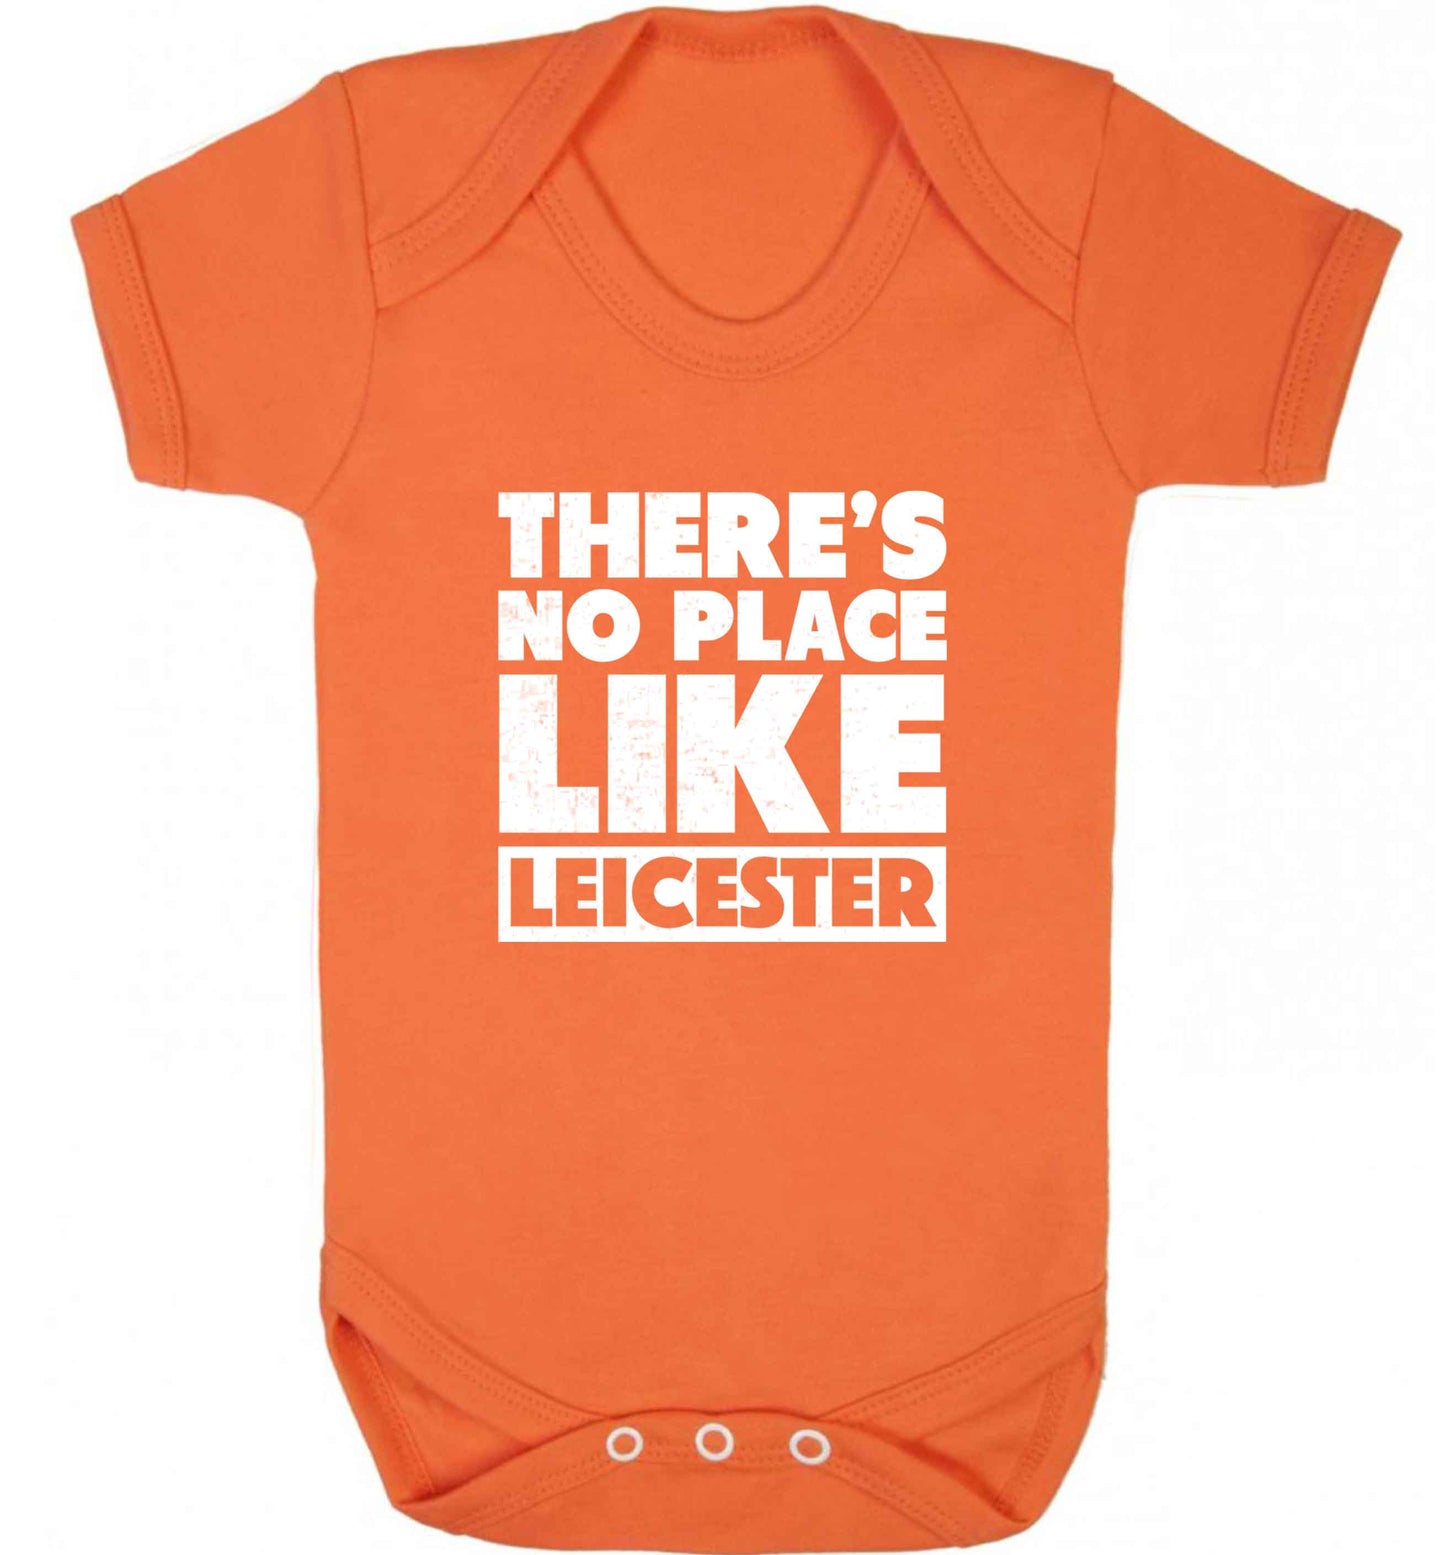 There's no place like Leicester baby vest orange 18-24 months